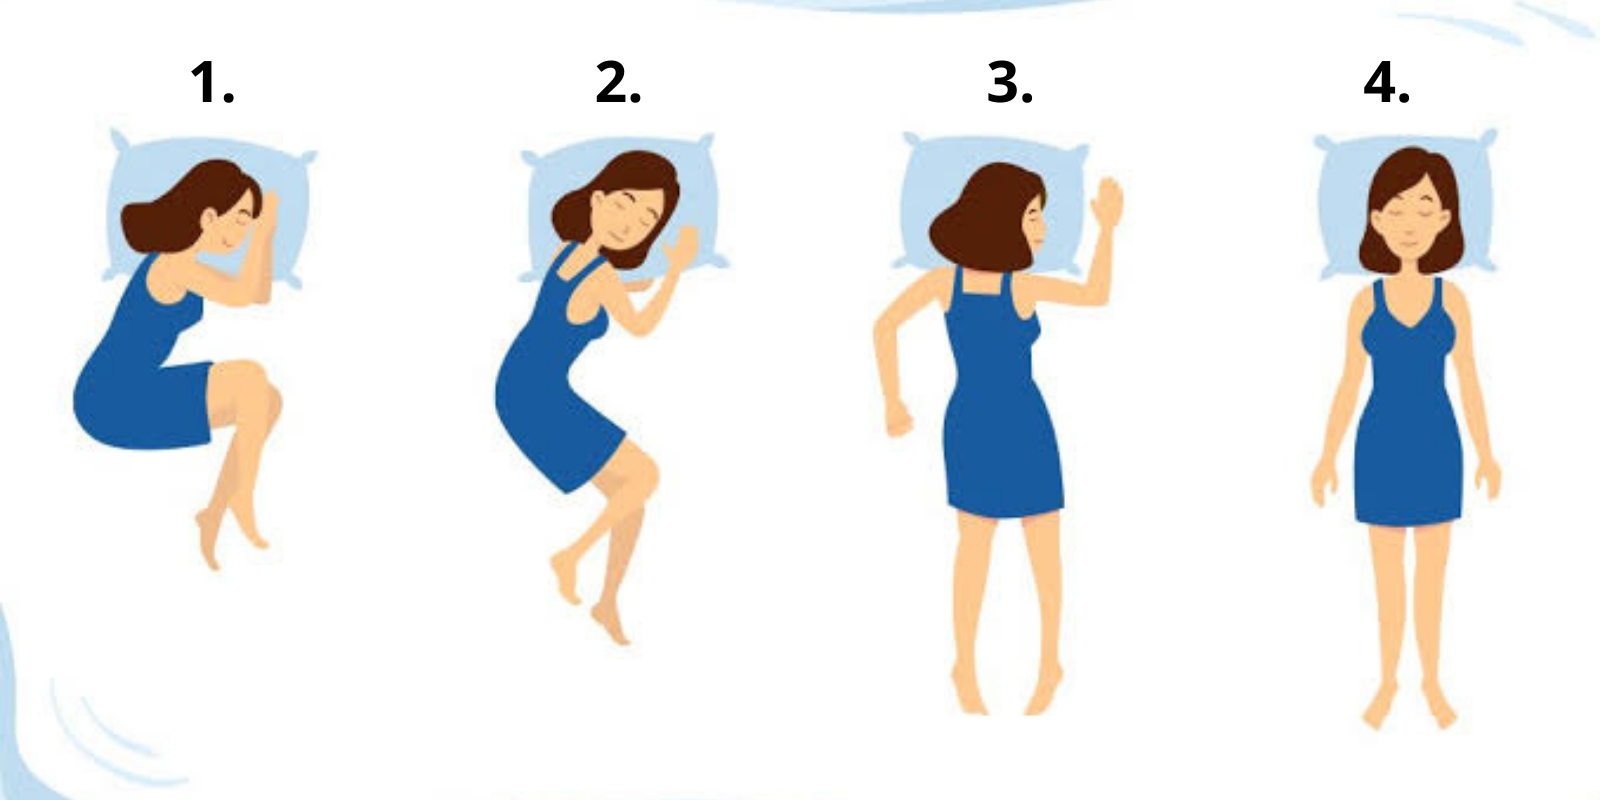 Pick a sleeping position: